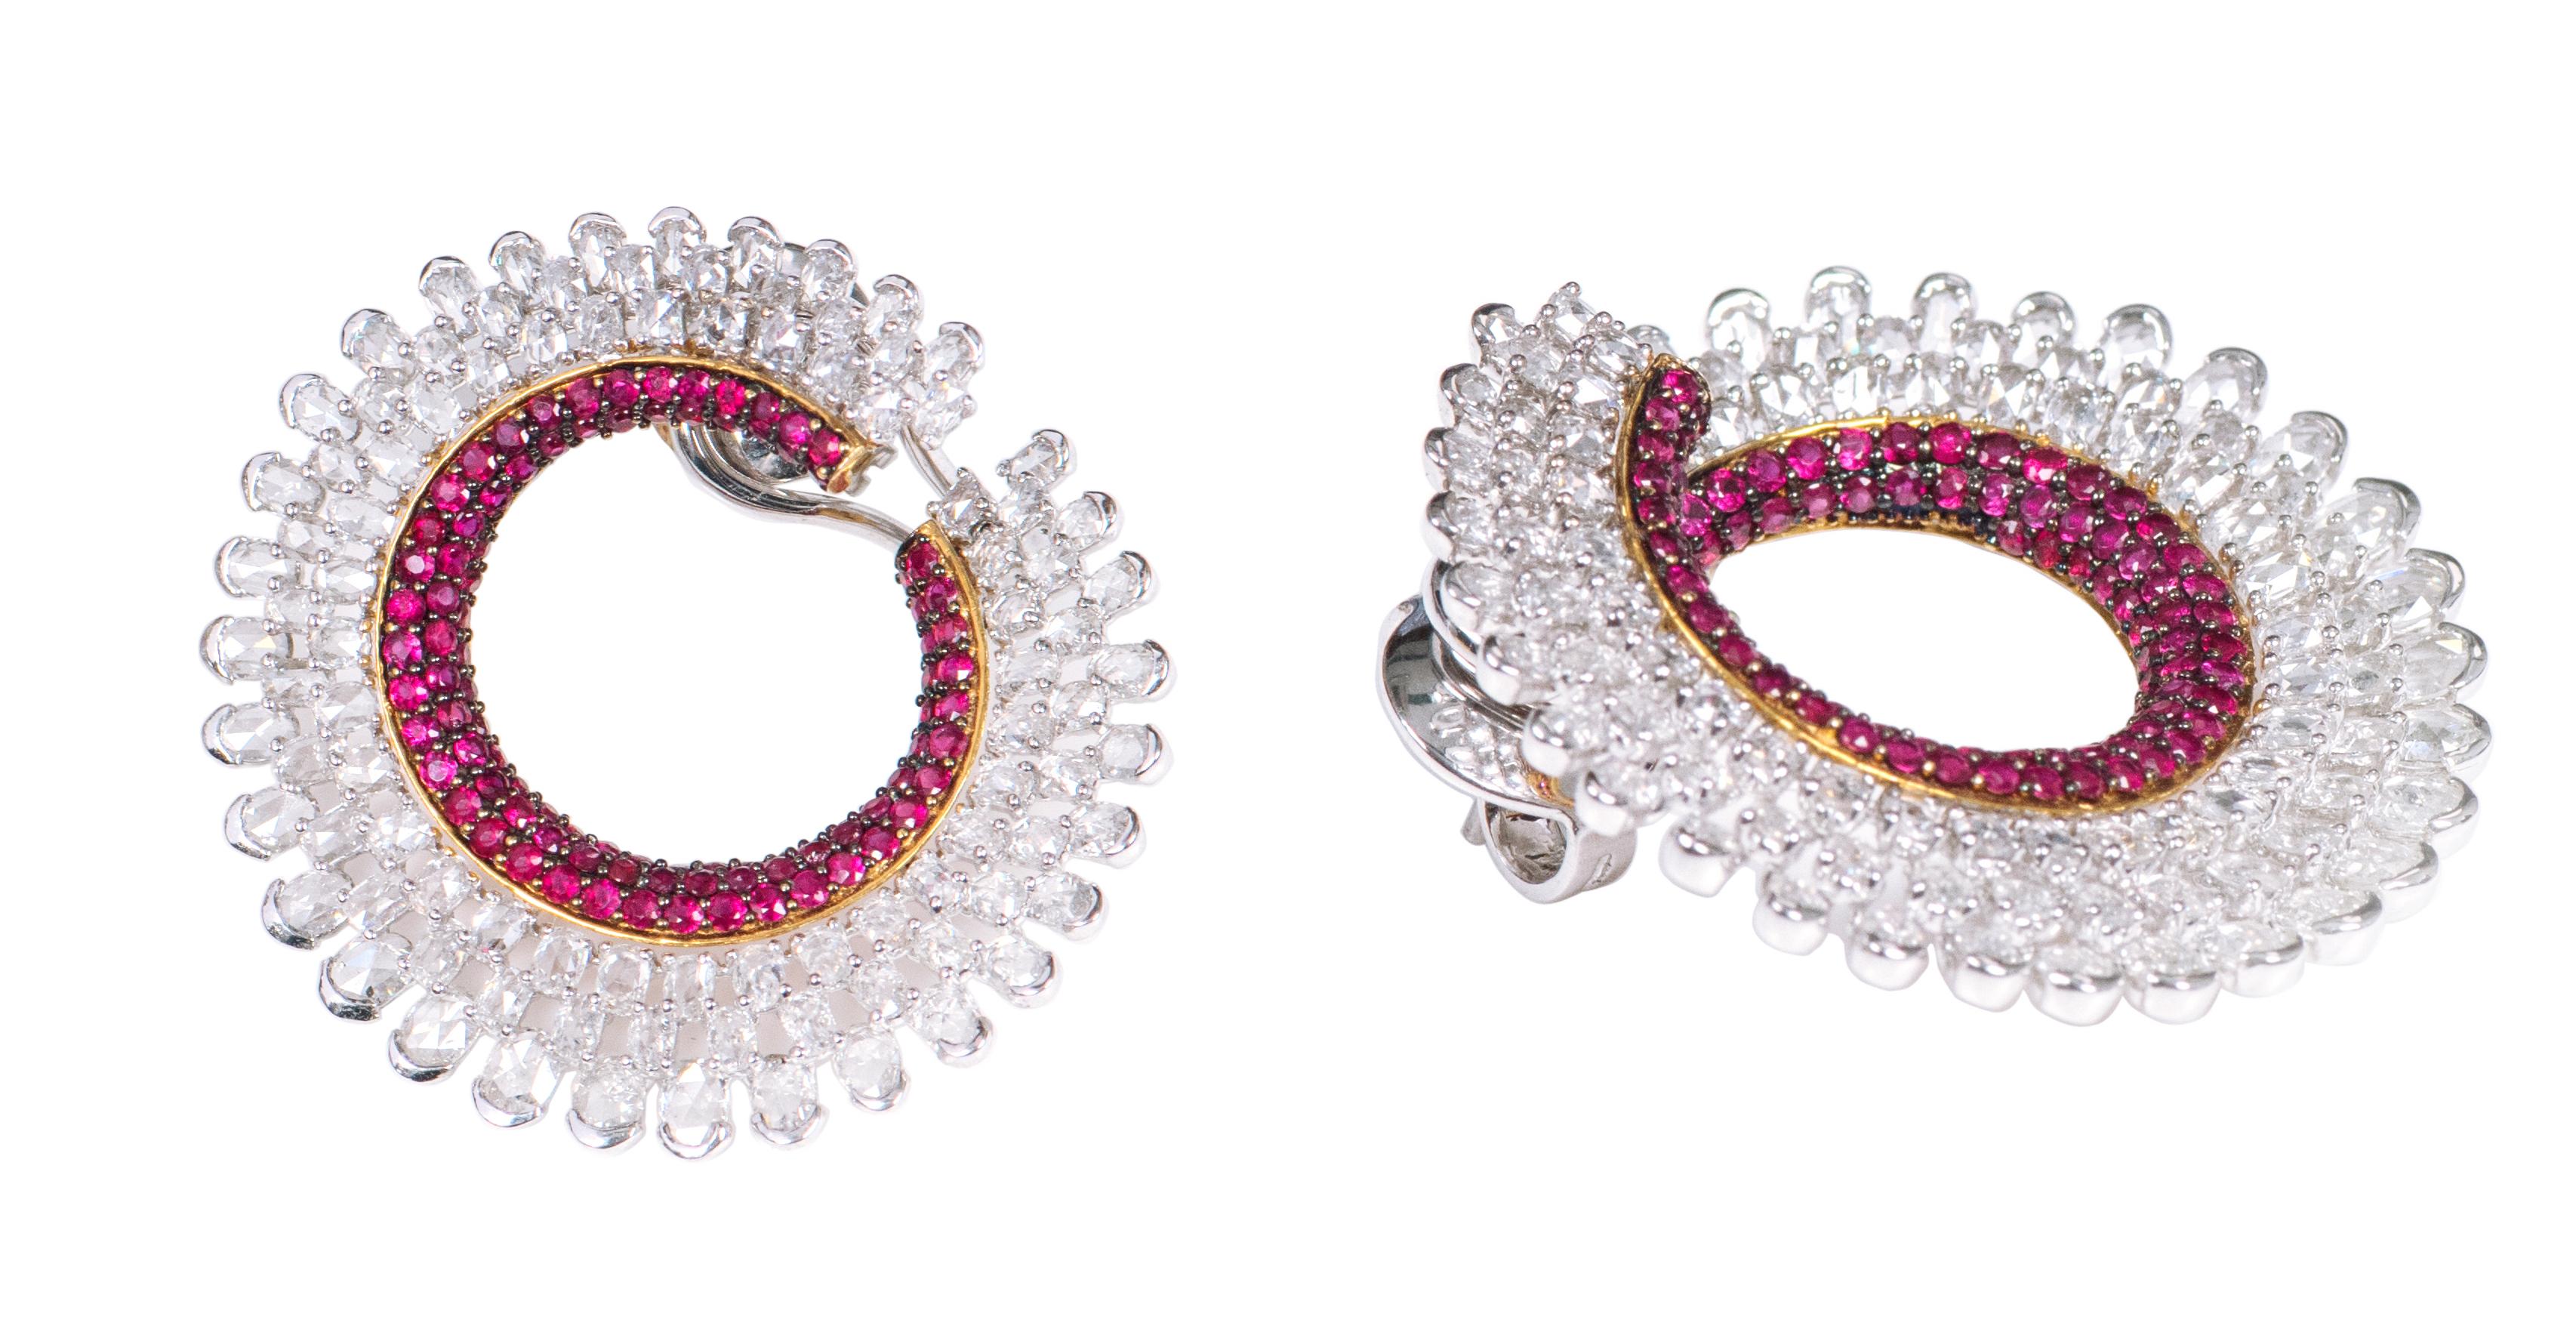 18 Karat White Gold 8.11 Carat Diamond and Ruby Cocktail Stud Hoop Earrings

This glorious blood red ruby and diamond rose-cut modern hoop earring is impeccable. The round pave set rubies are curved inwards forming the magnificent base of this